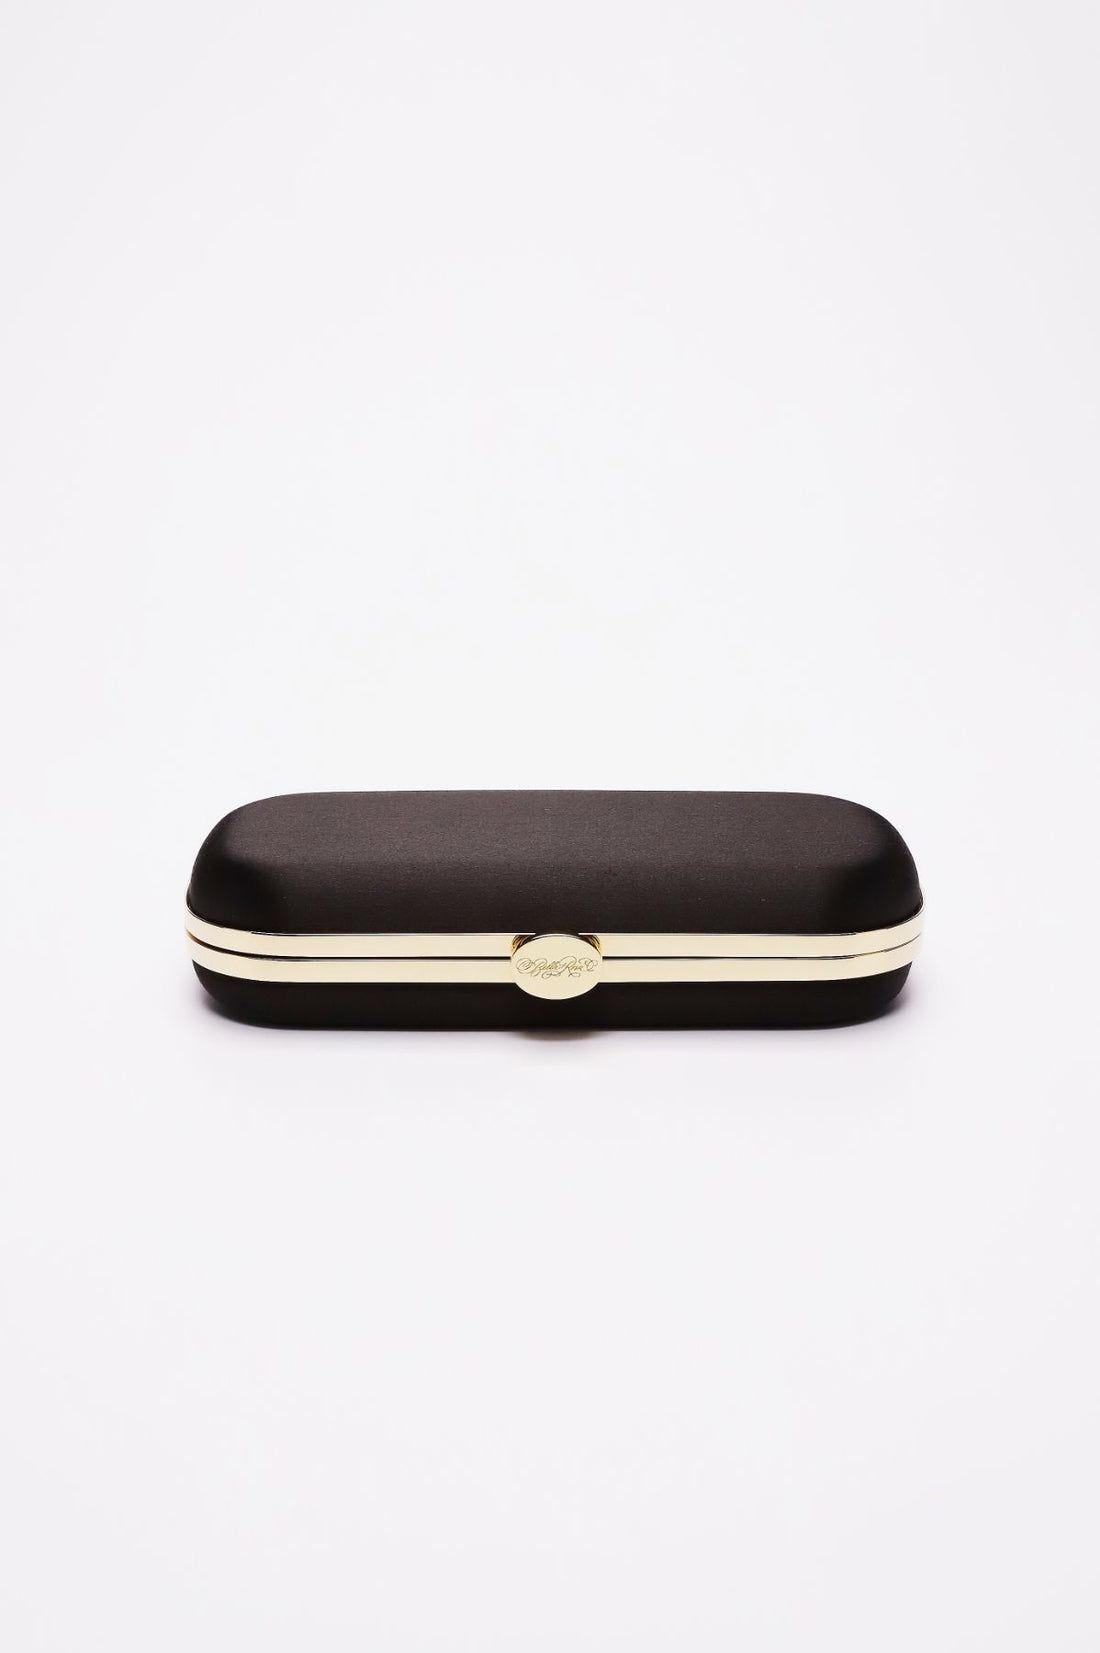 Top closed view of Bella Clutch in black satin with gold hardware frame.